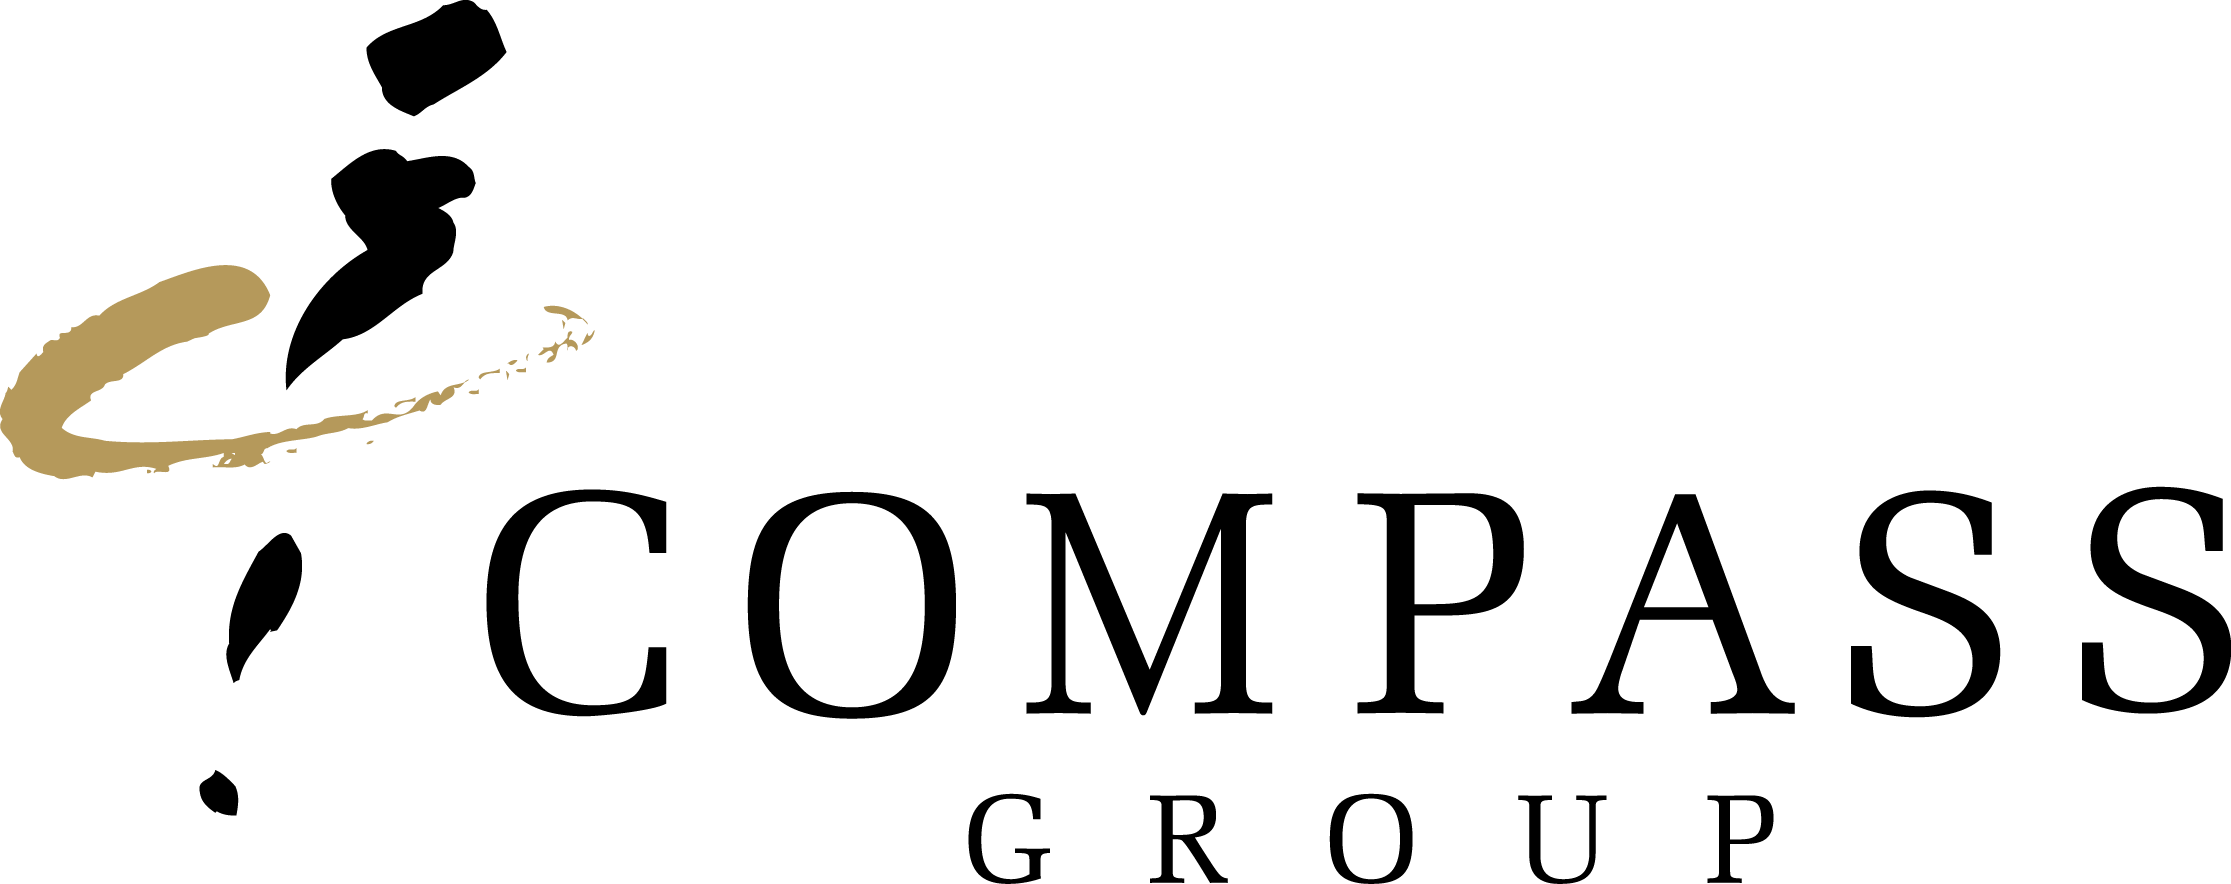 Compass Group Logo - Full Colour - CMYK.png